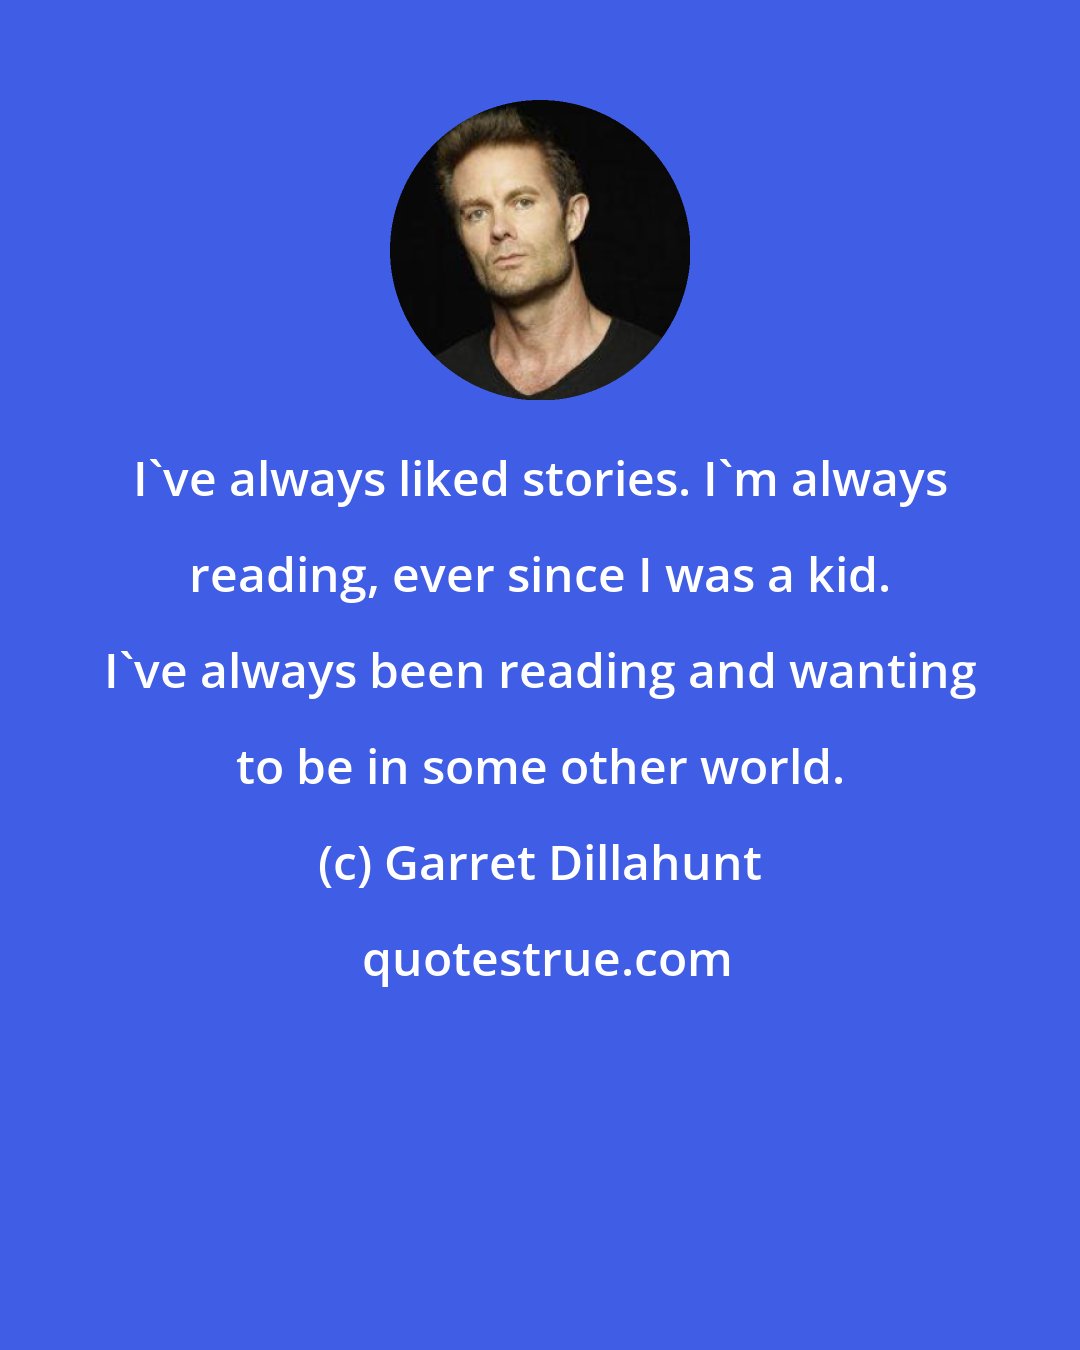 Garret Dillahunt: I've always liked stories. I'm always reading, ever since I was a kid. I've always been reading and wanting to be in some other world.